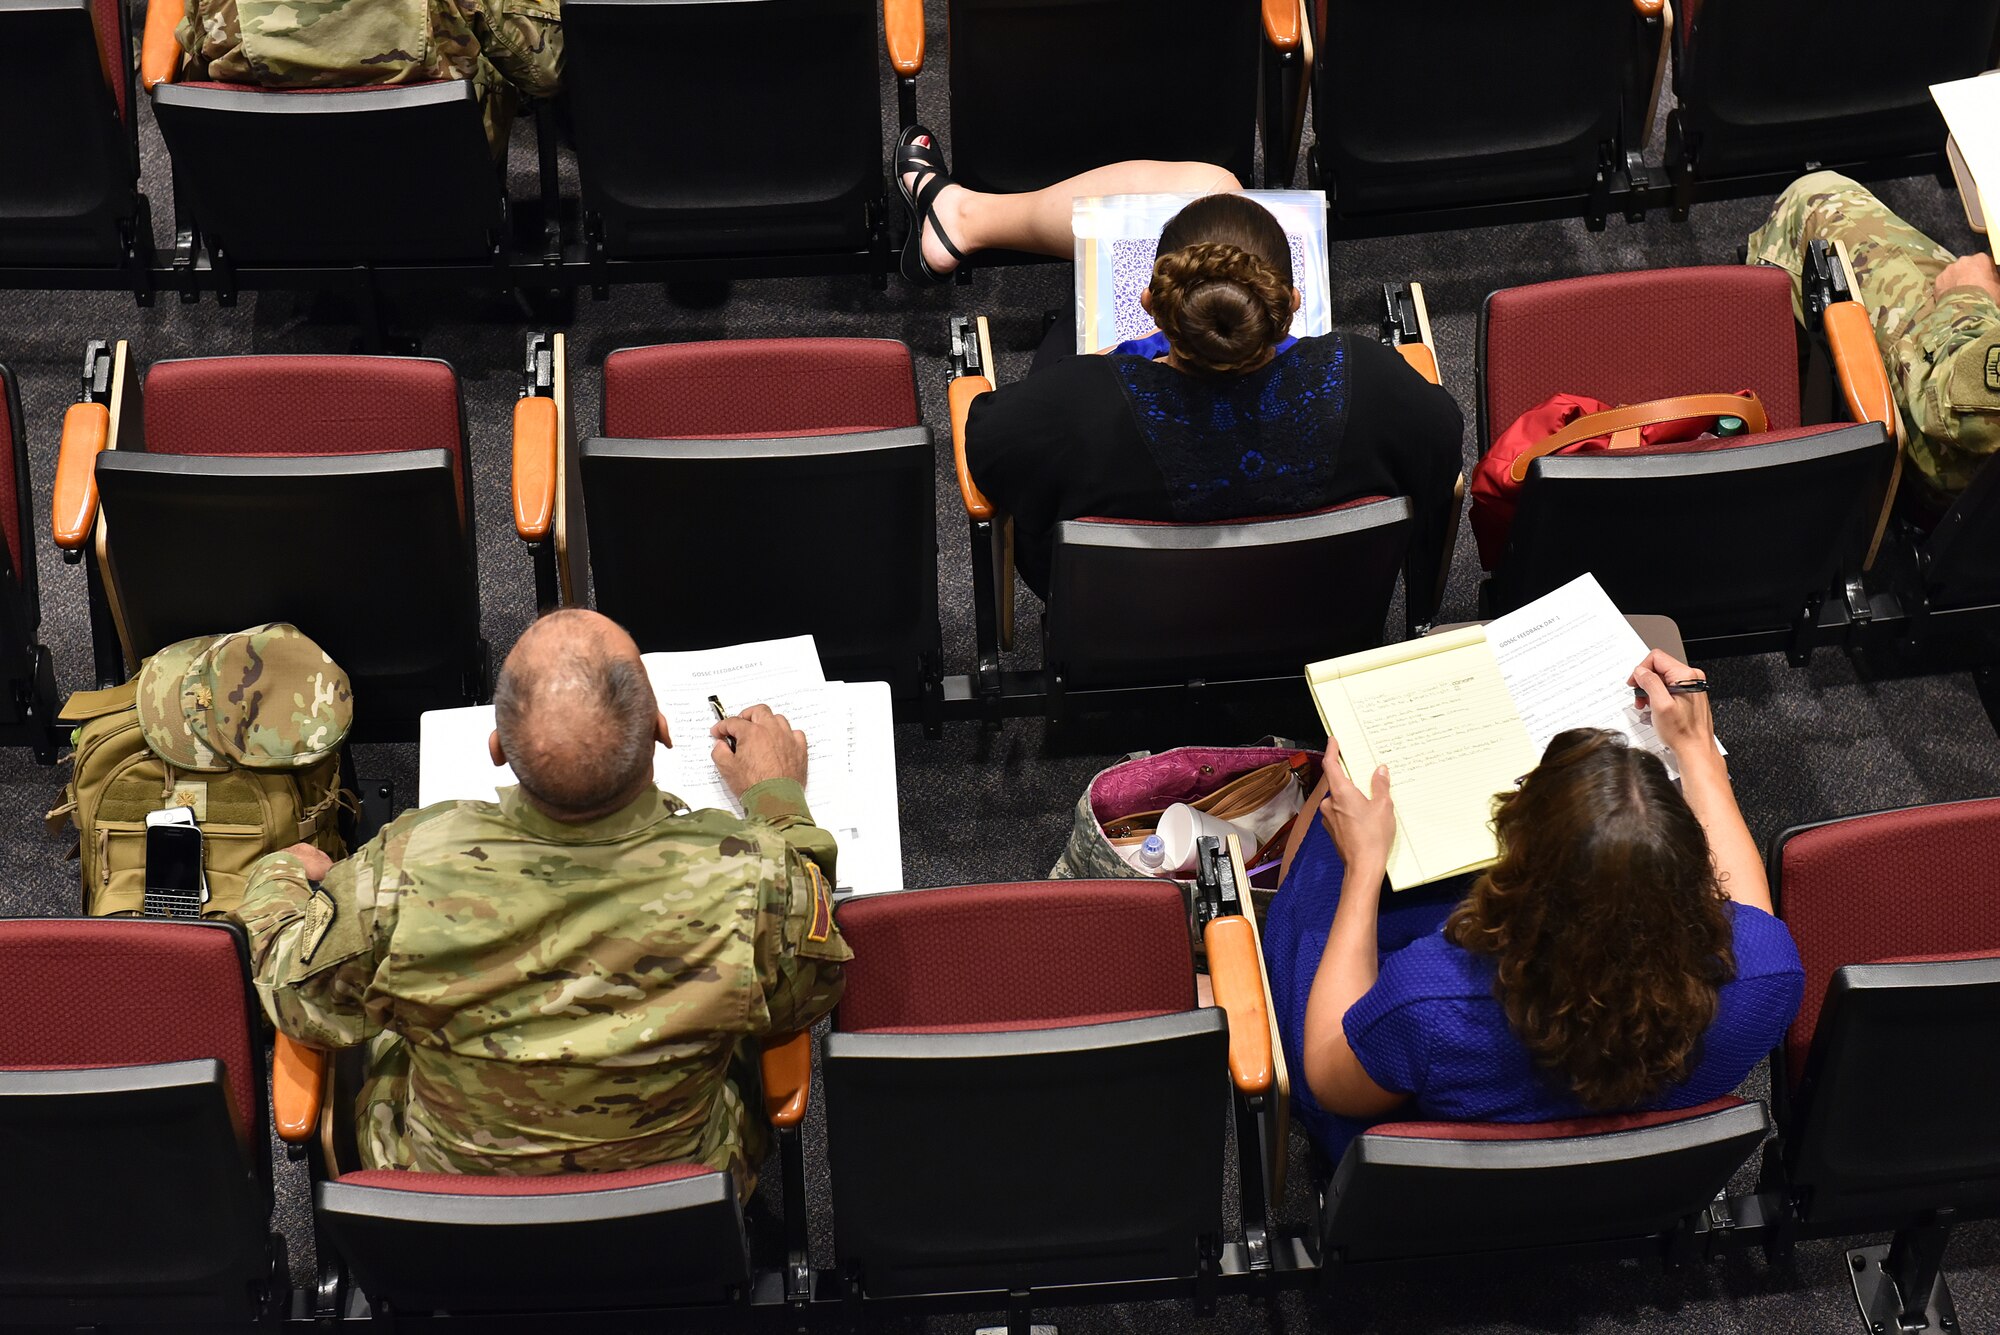 National Guard Soldiers and civilians assigned to general officers' staffs attend a lecture Aug. 30, 2016, during the General Officer Support Staff Course at the I.G. Brown Training and Education Center on McGhee Tyson Air National Guard Base in Louisville, Tenn. (U.S. Air National Guard photo by Master Sgt. Mike R. Smith)